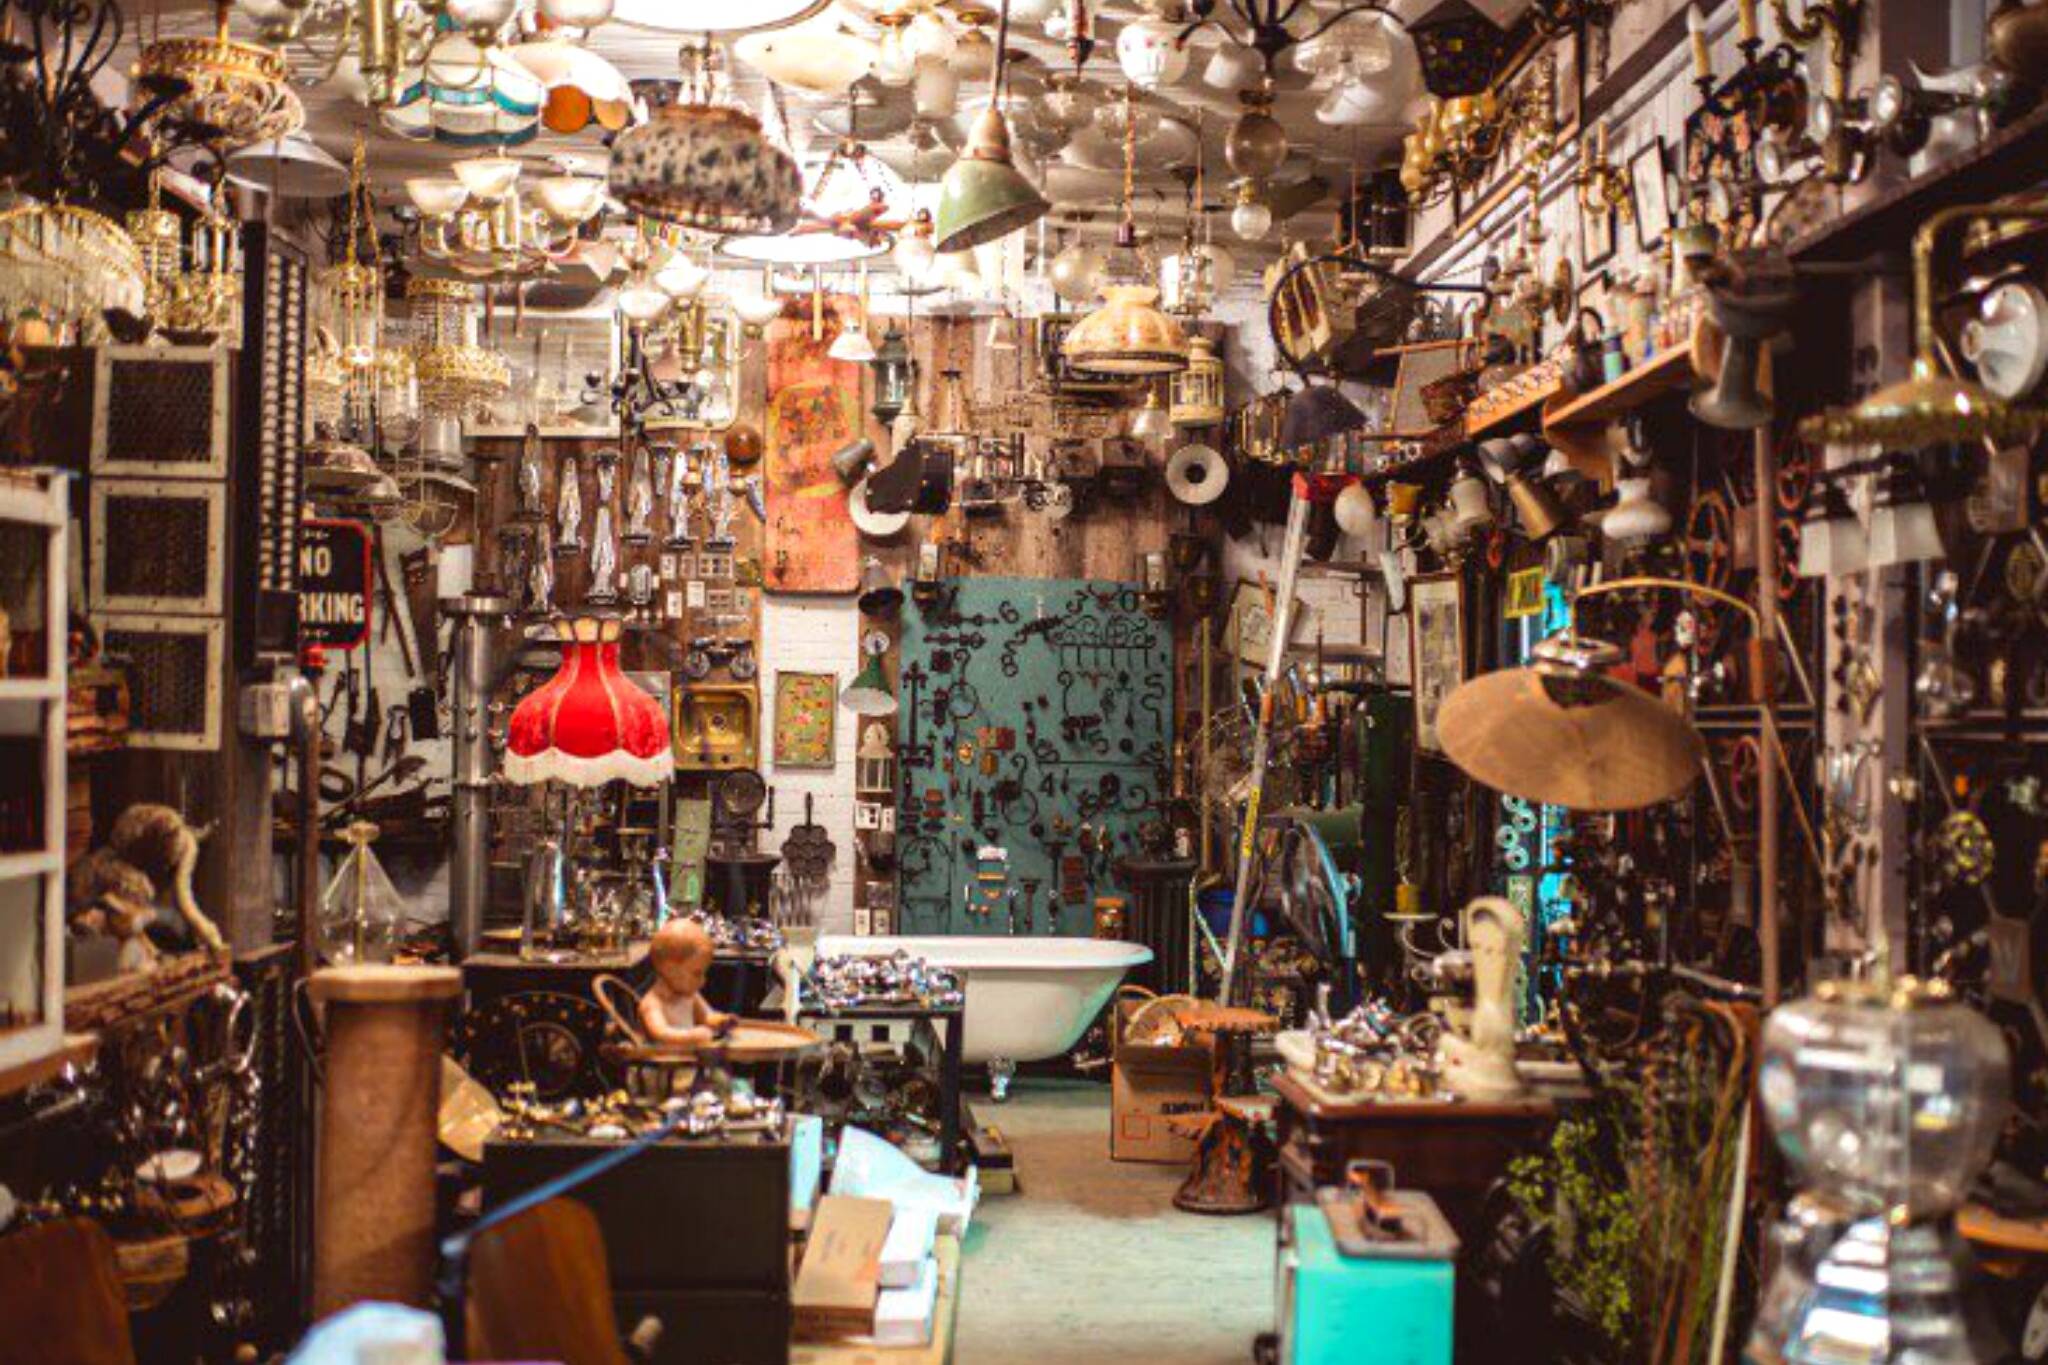 Toronto's most famous antique store is closing